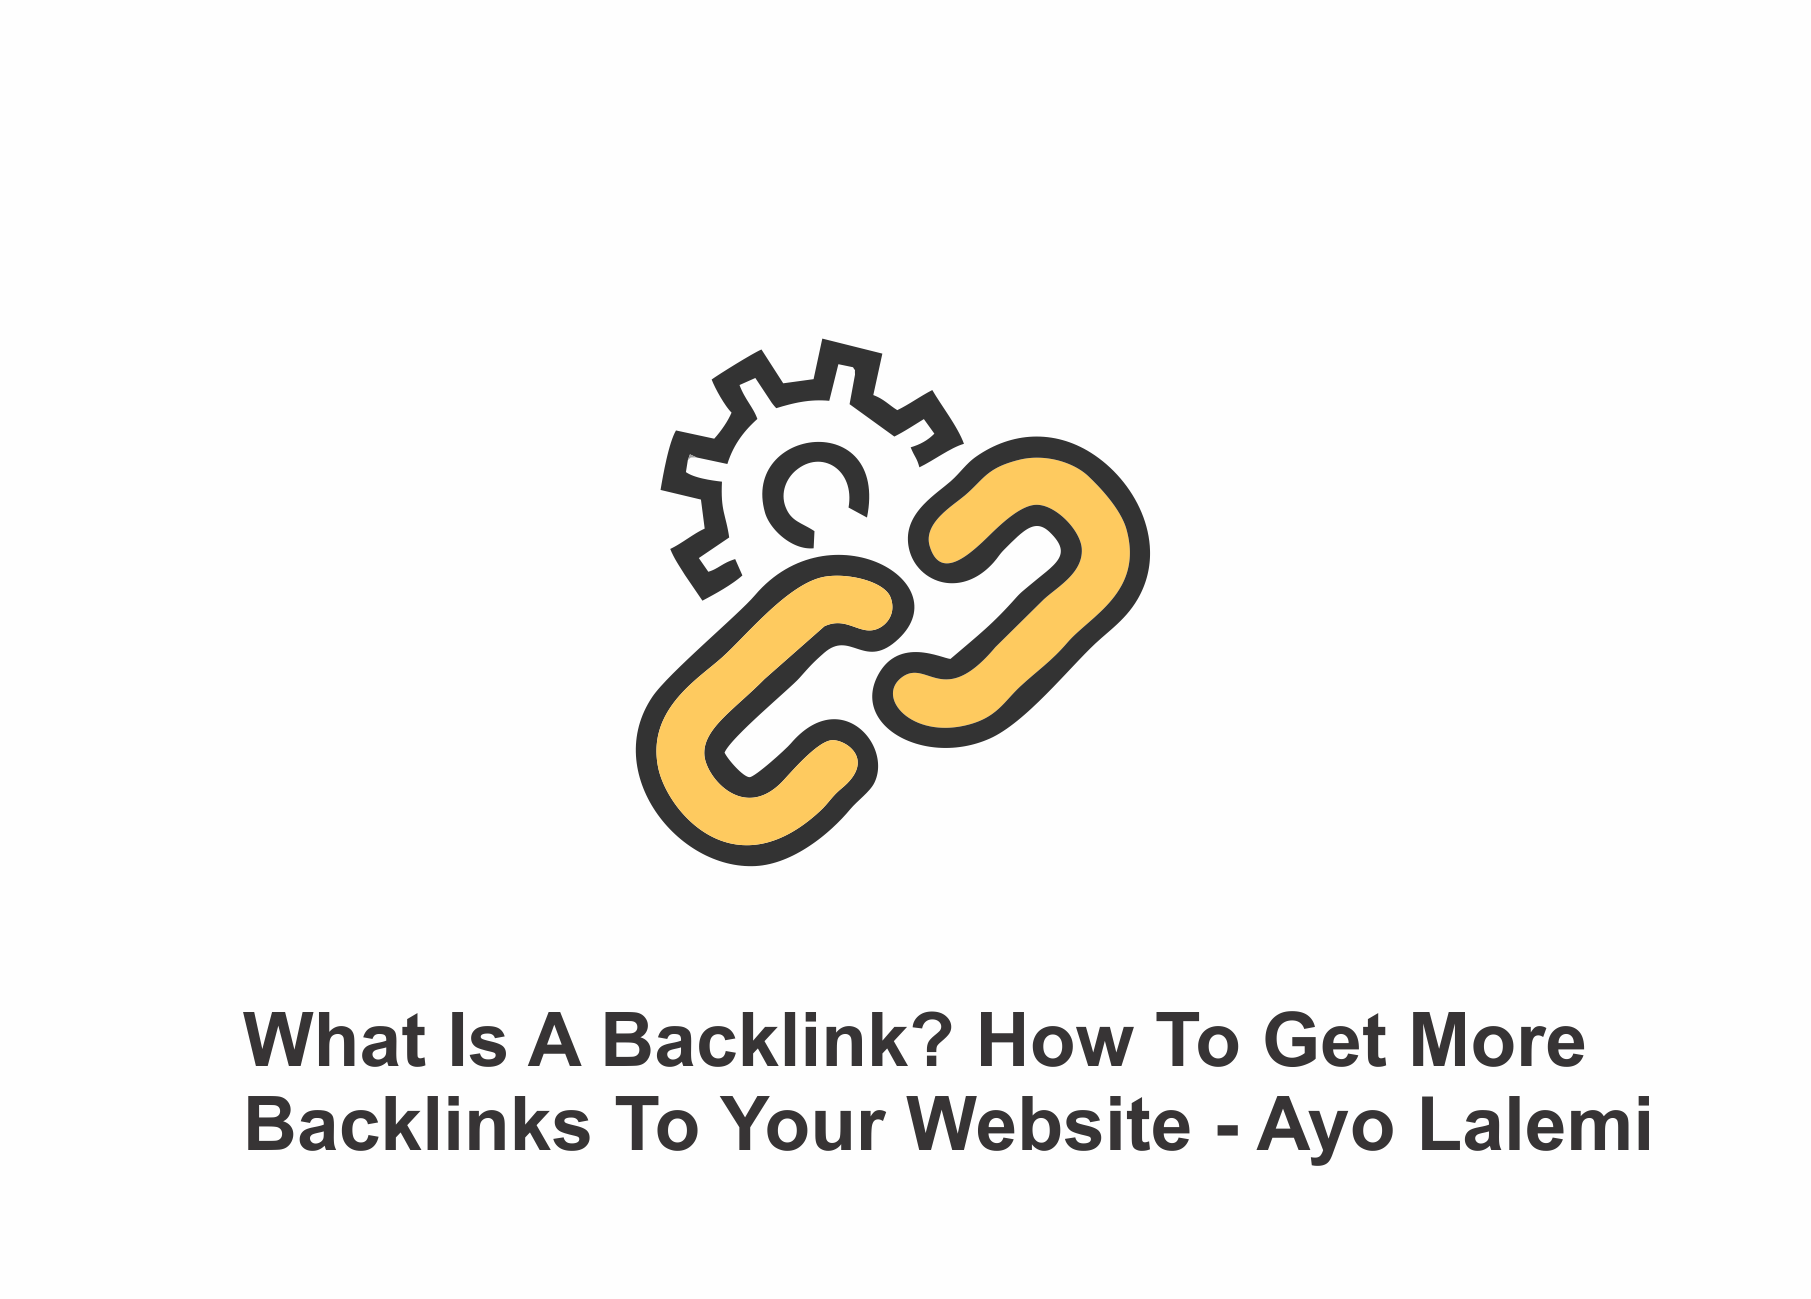 How To Get More Backlinks To Your Website - Ayomidelalemi.com